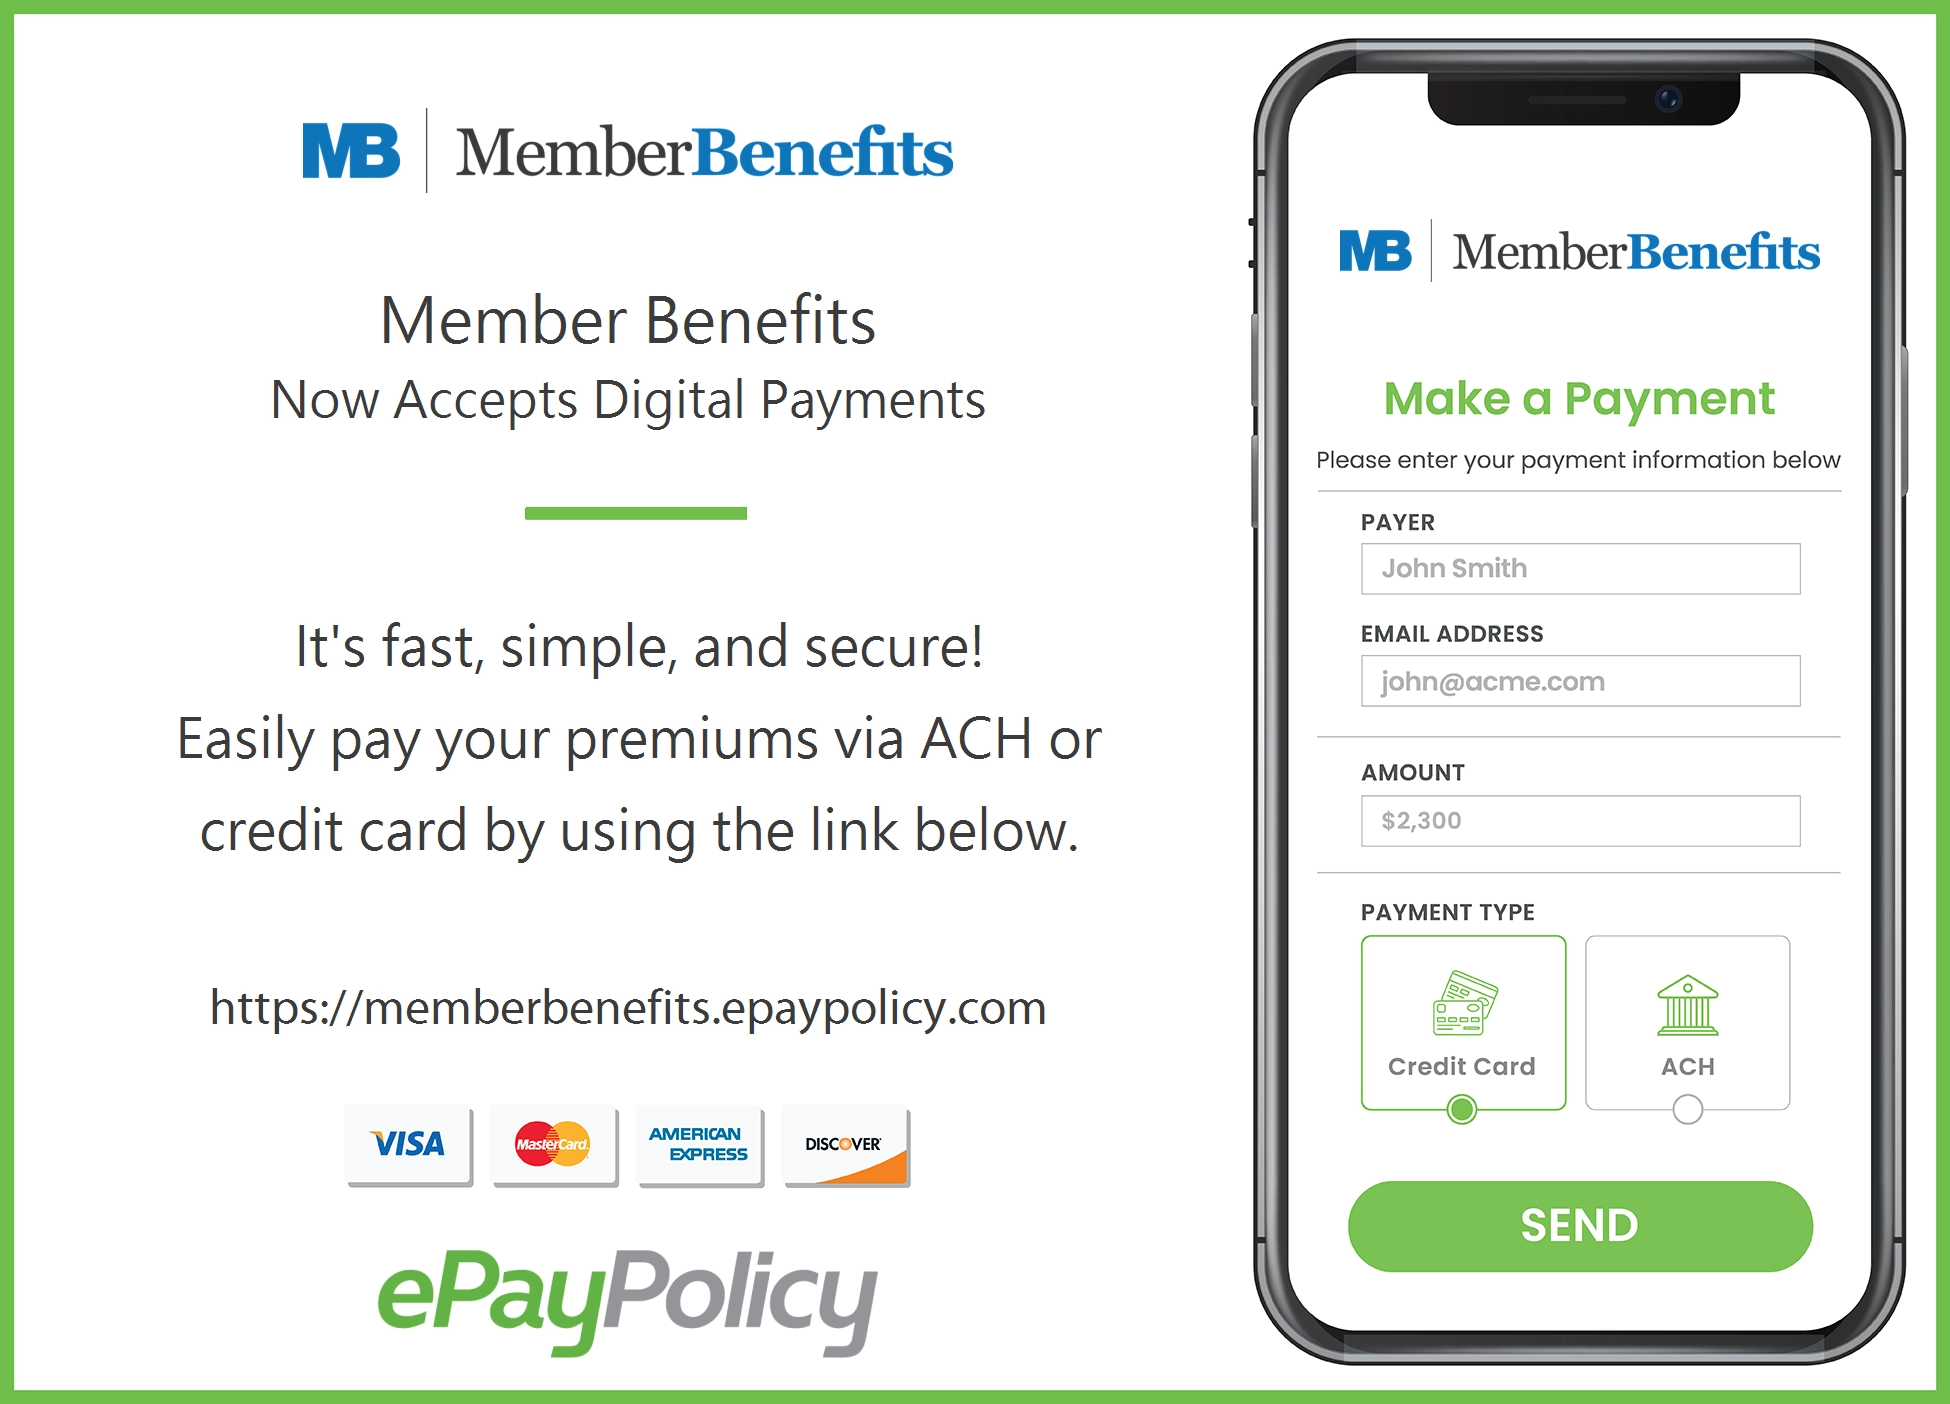 Member Benefits ePay Policy graphic